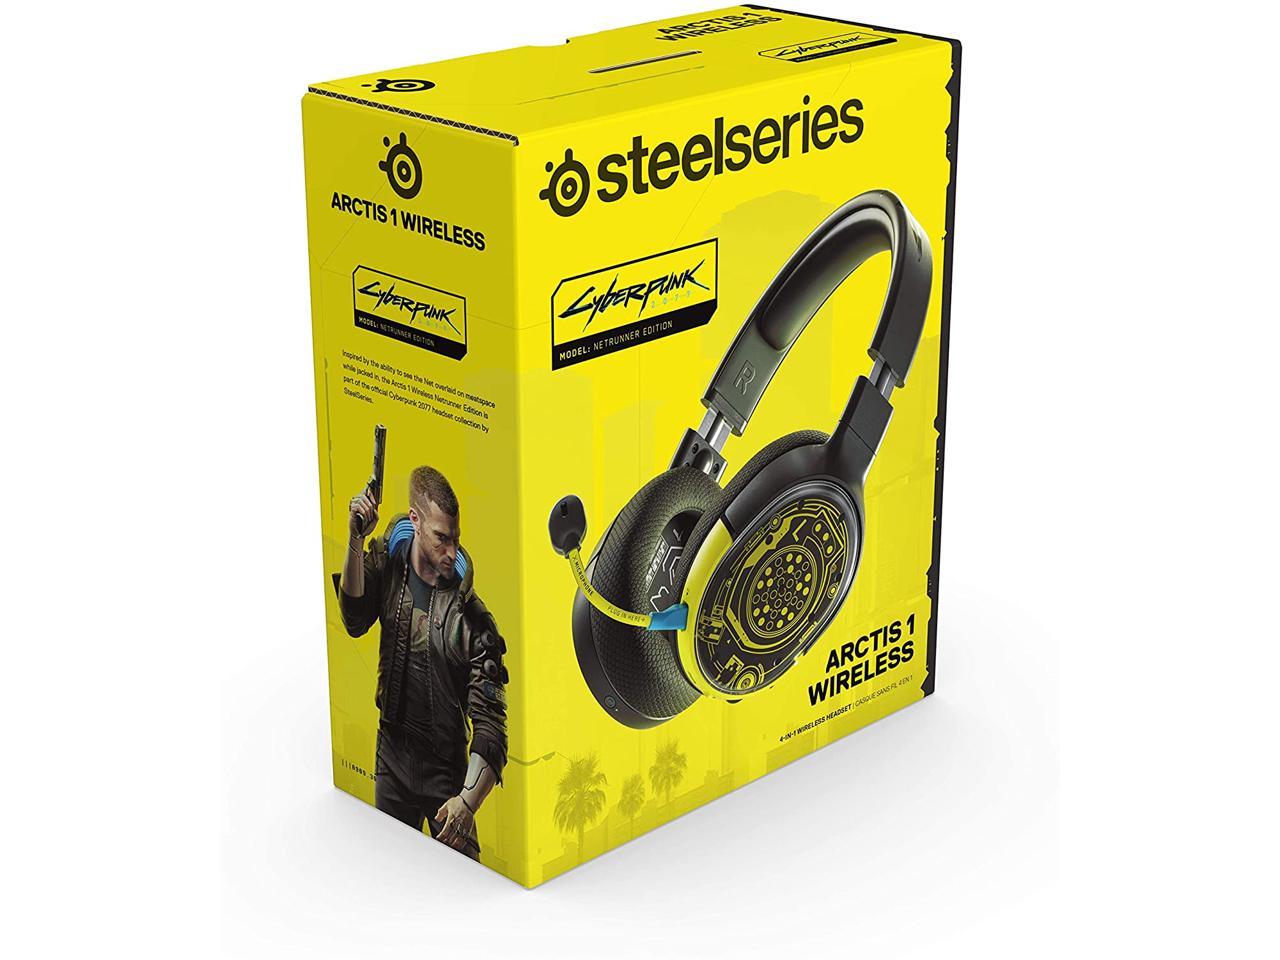 Steelseries Arctis 1 Wireless Cyberpunk Limited Edition Gaming Headset Usb C Wireless Detachable Clearcast Microphone Compatible With Pc Ps4 Xbox Nintendo Switch And Lite Android Netrunner Newegg Com